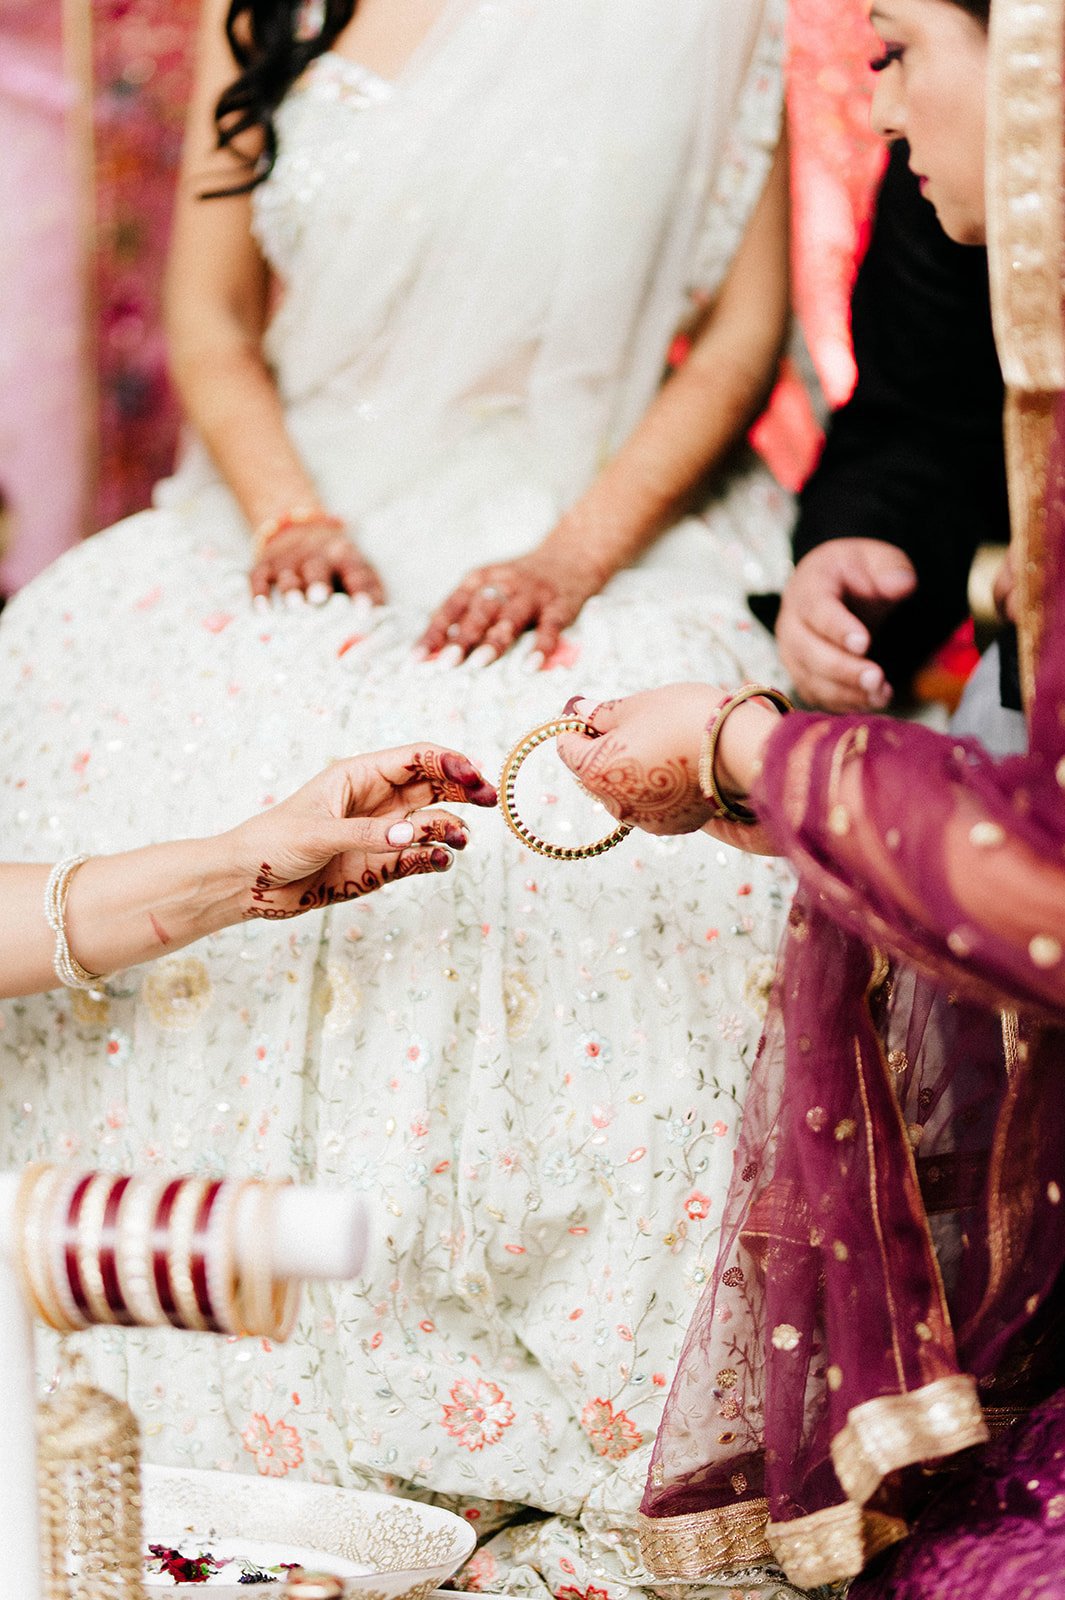 A bride receives colourful red bangles in a traditional ceremony